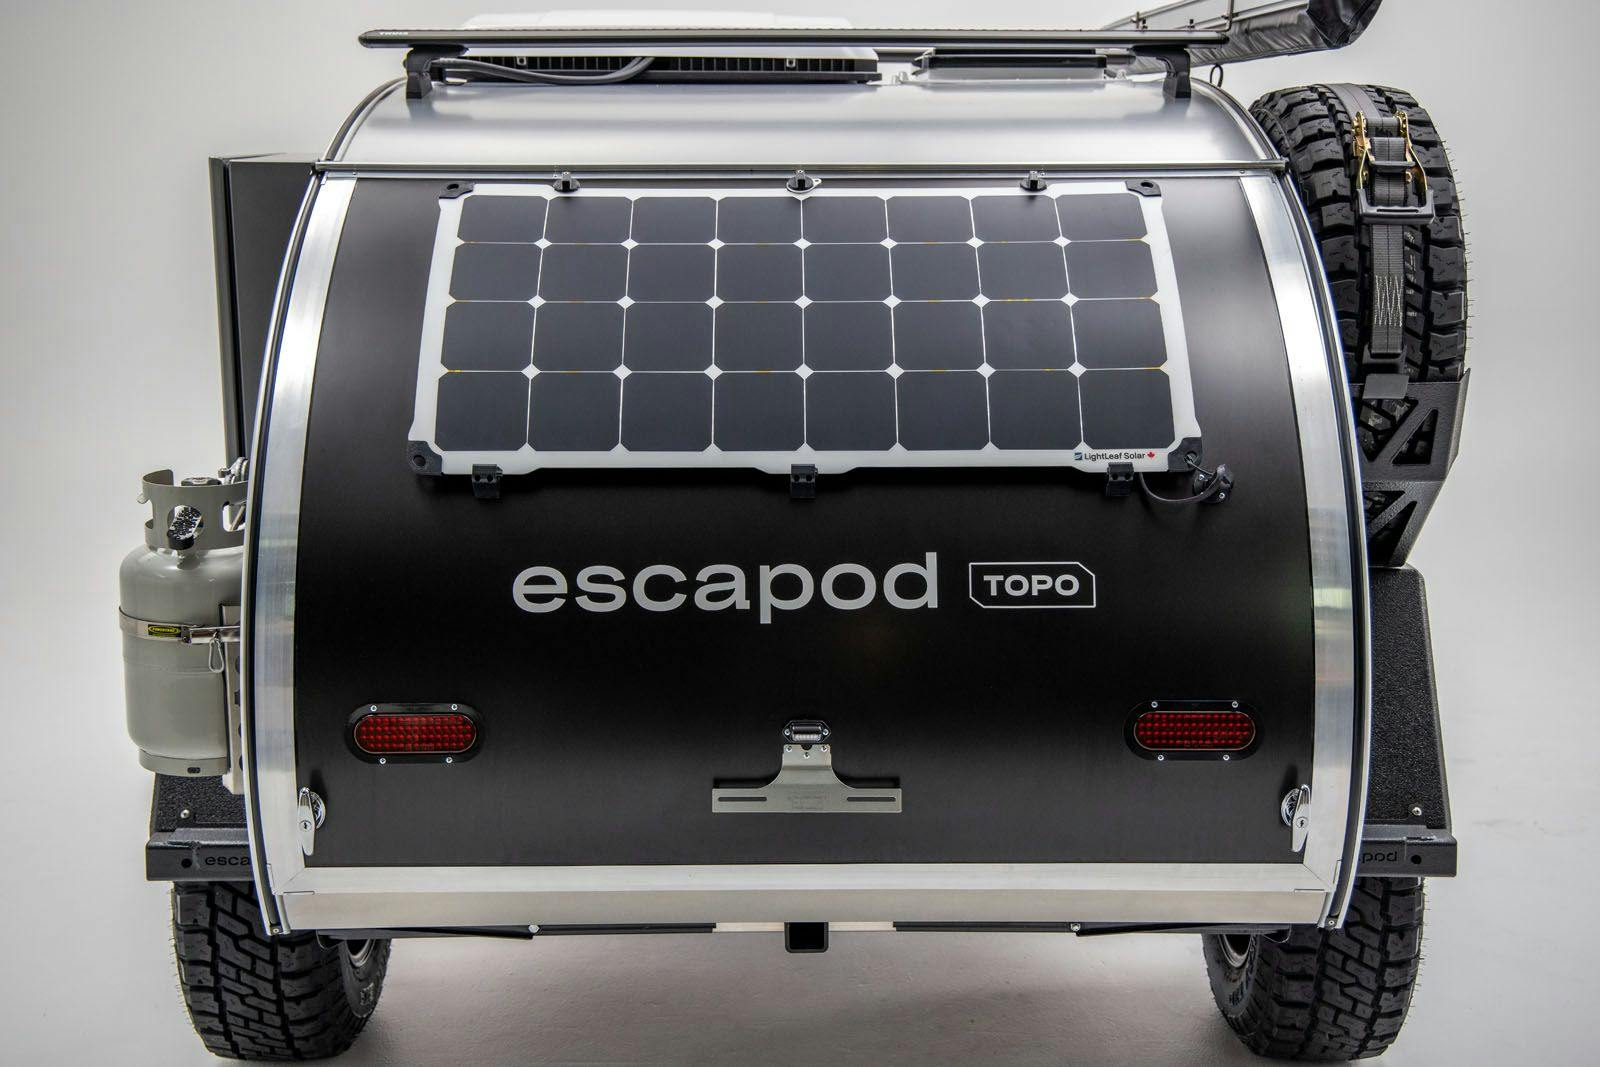 A rear shot of a teardrop trailer showing a propane mount, solar panel, and spare tire all mounted to the sides and rear.